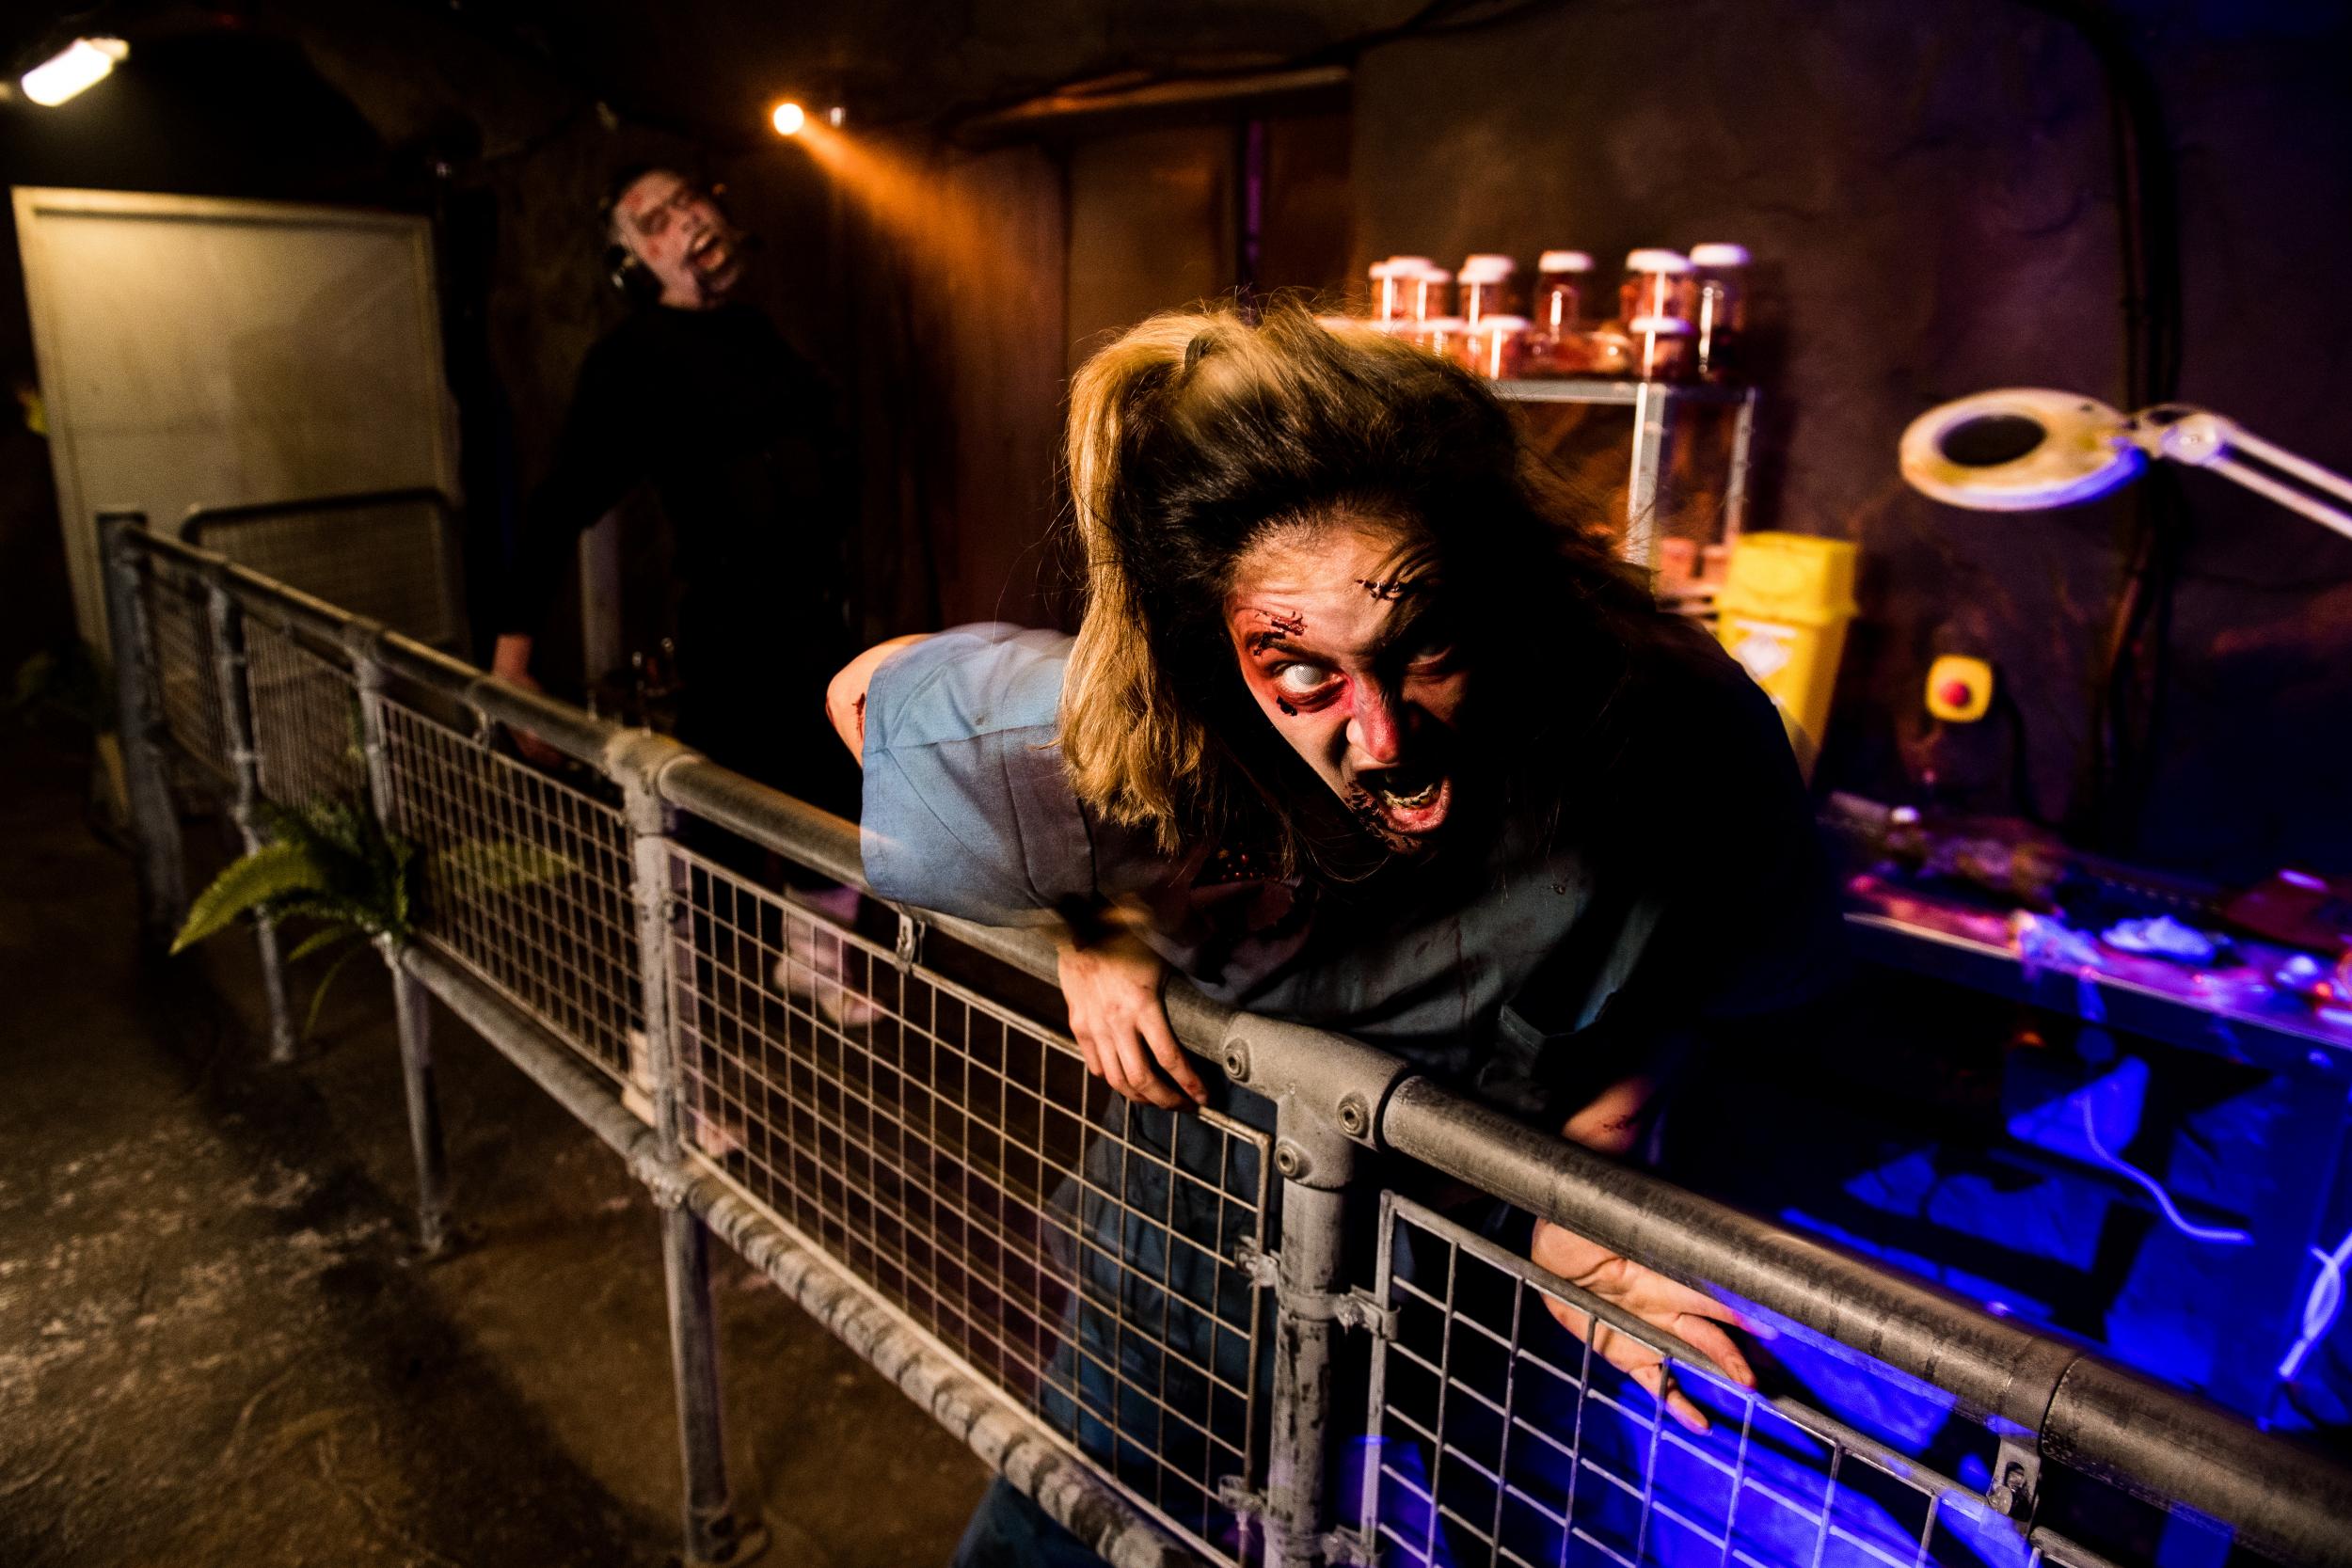 The park creates interactive scare mazes that visitors can explore